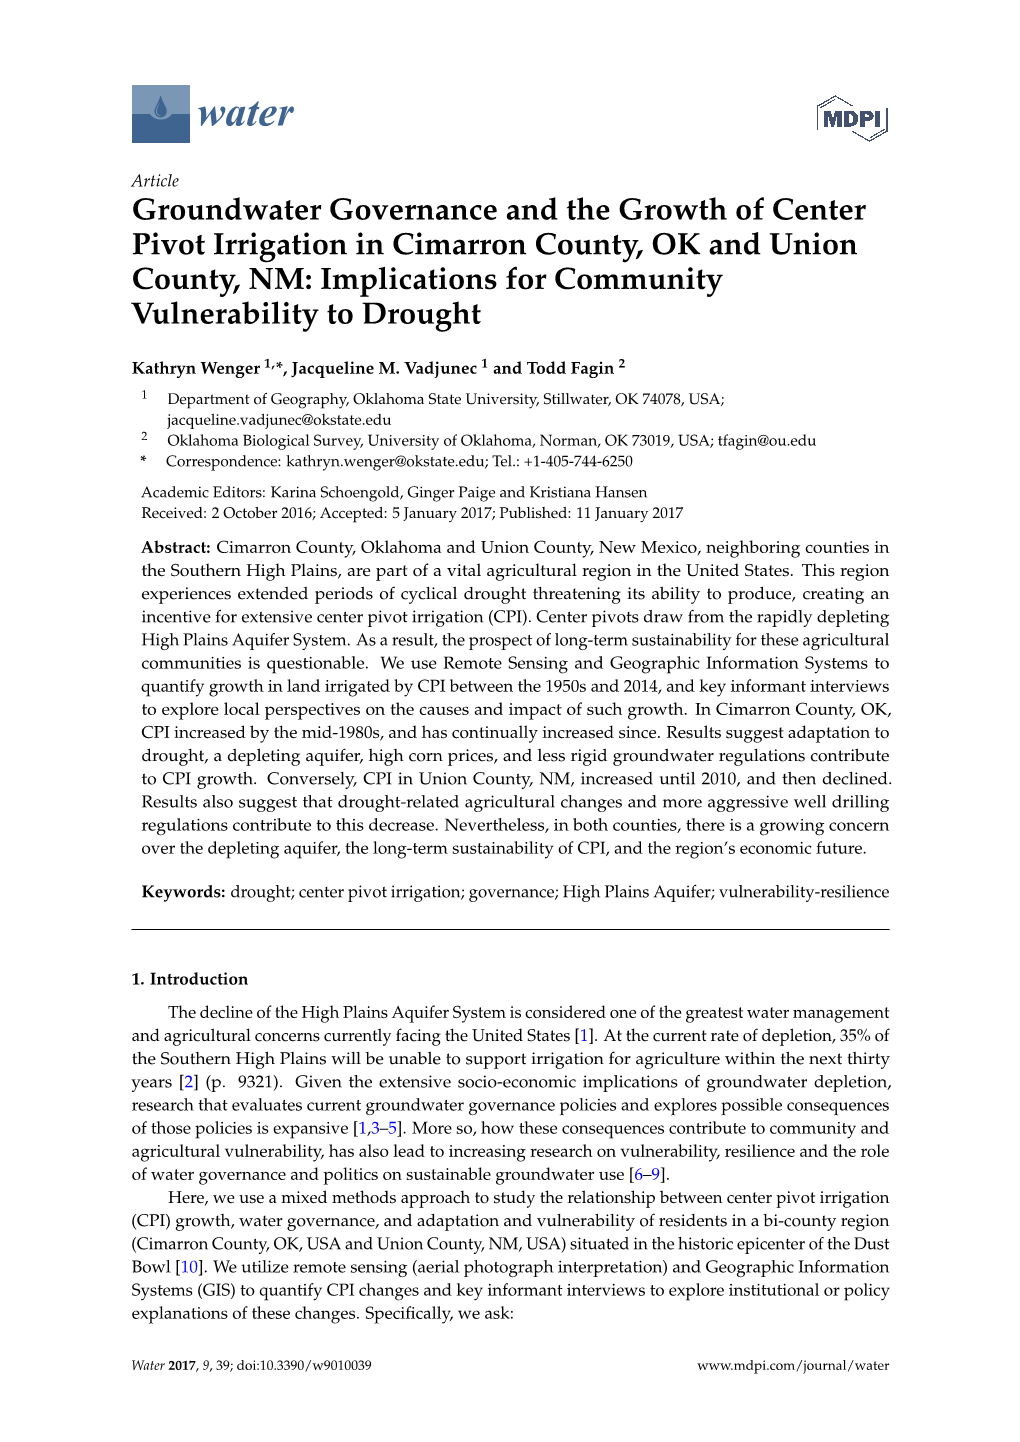 Groundwater Governance and the Growth of Center Pivot Irrigation in Cimarron County, OK and Union County, NM: Implications for Community Vulnerability to Drought